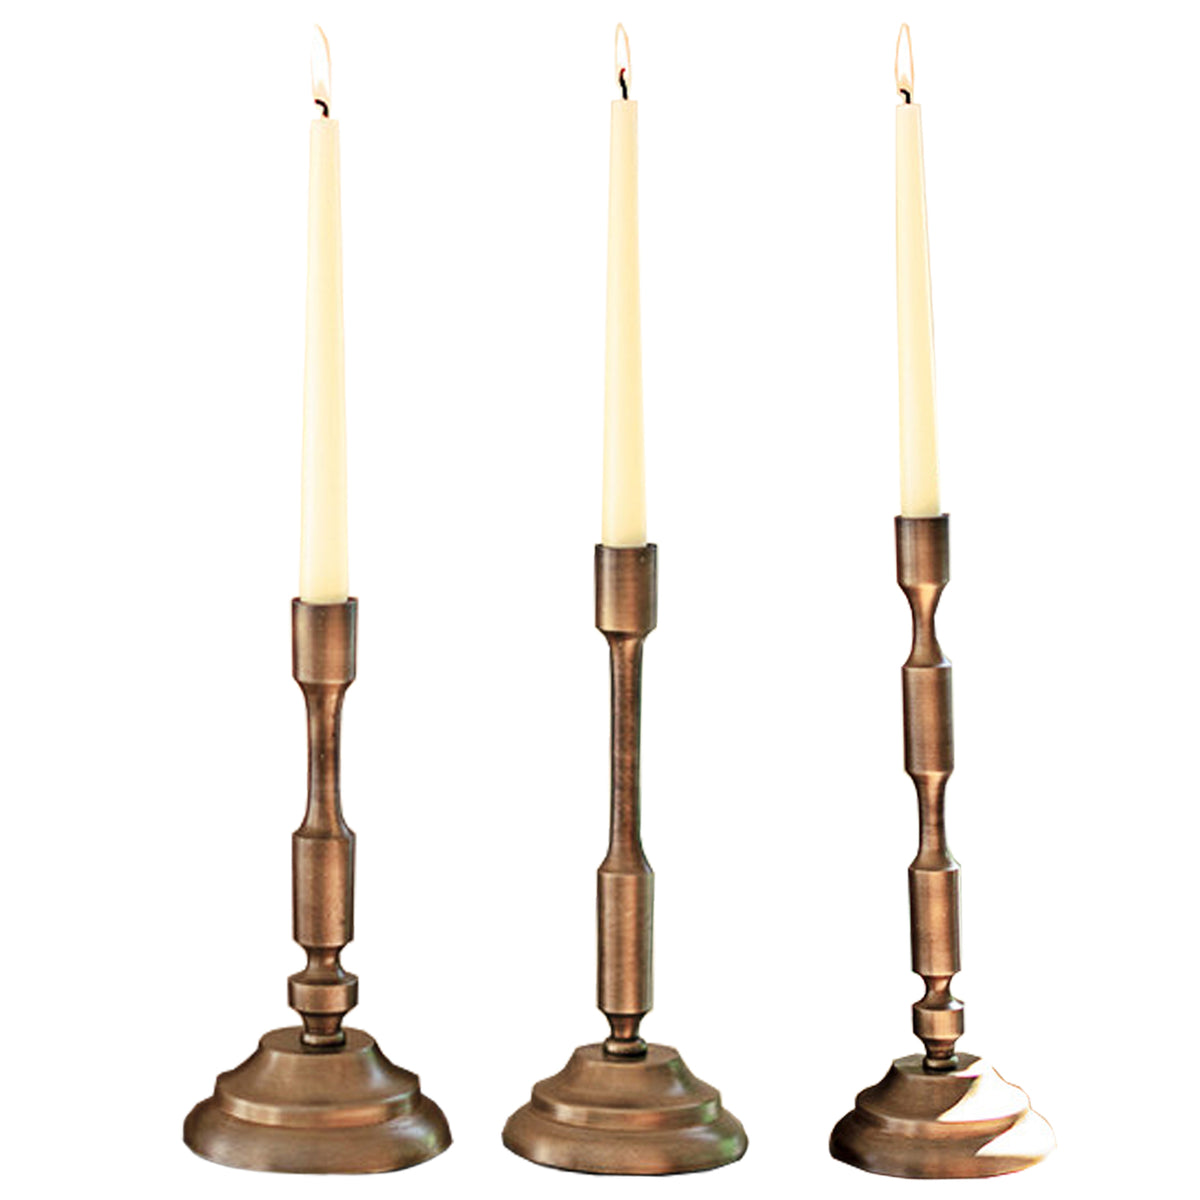 Antique Brass Taper Candle Holders - Set of 3 CLL2695 by Kalalou